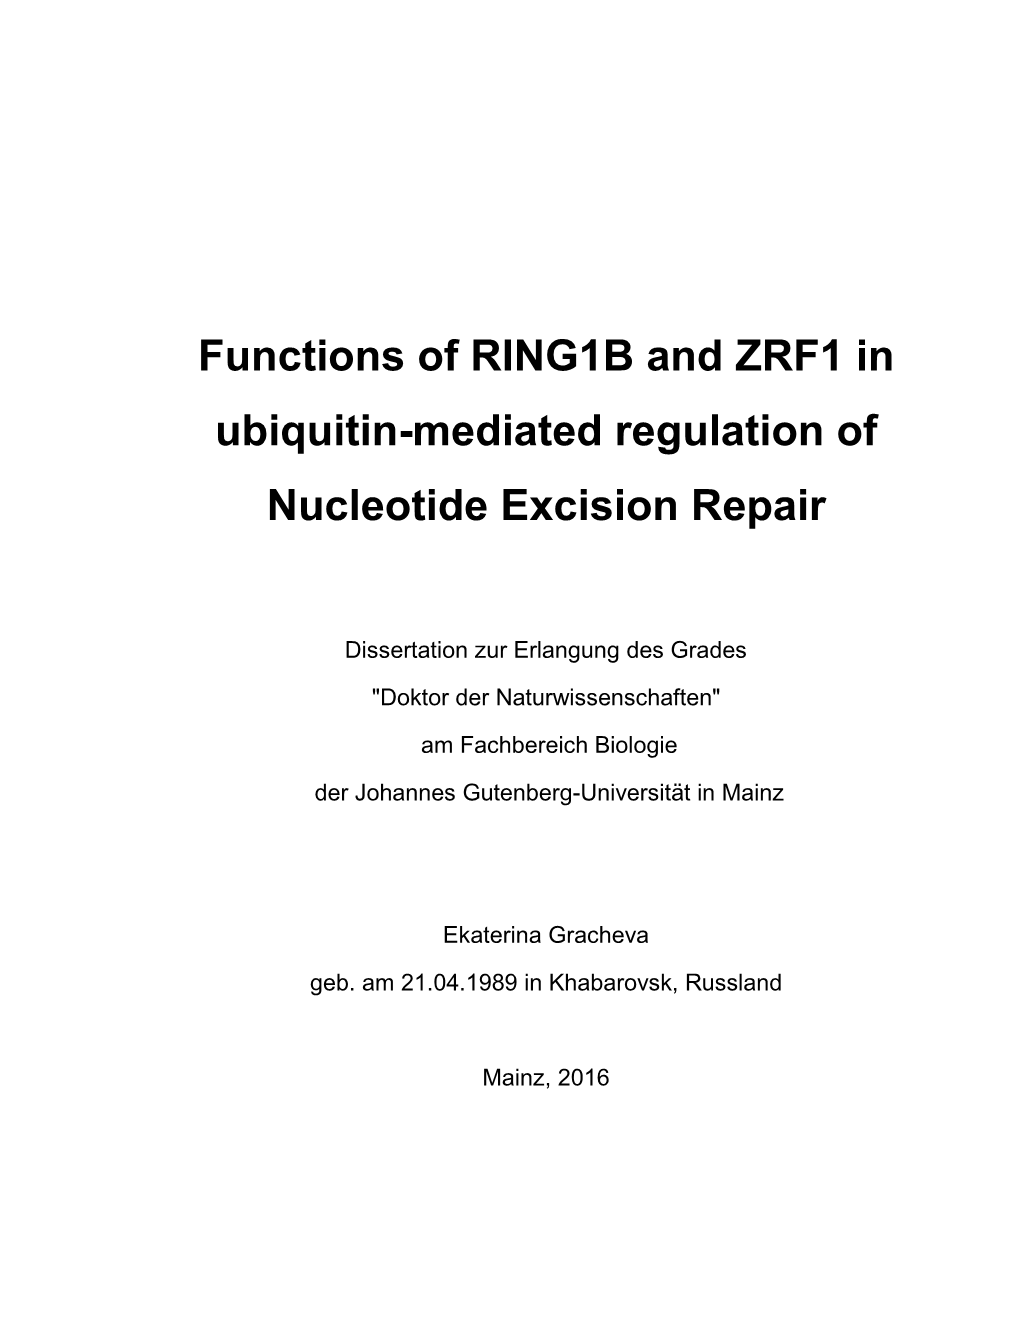 Functions of RING1B and ZRF1 in Ubiquitin-Mediated Regulation of Nucleotide Excision Repair